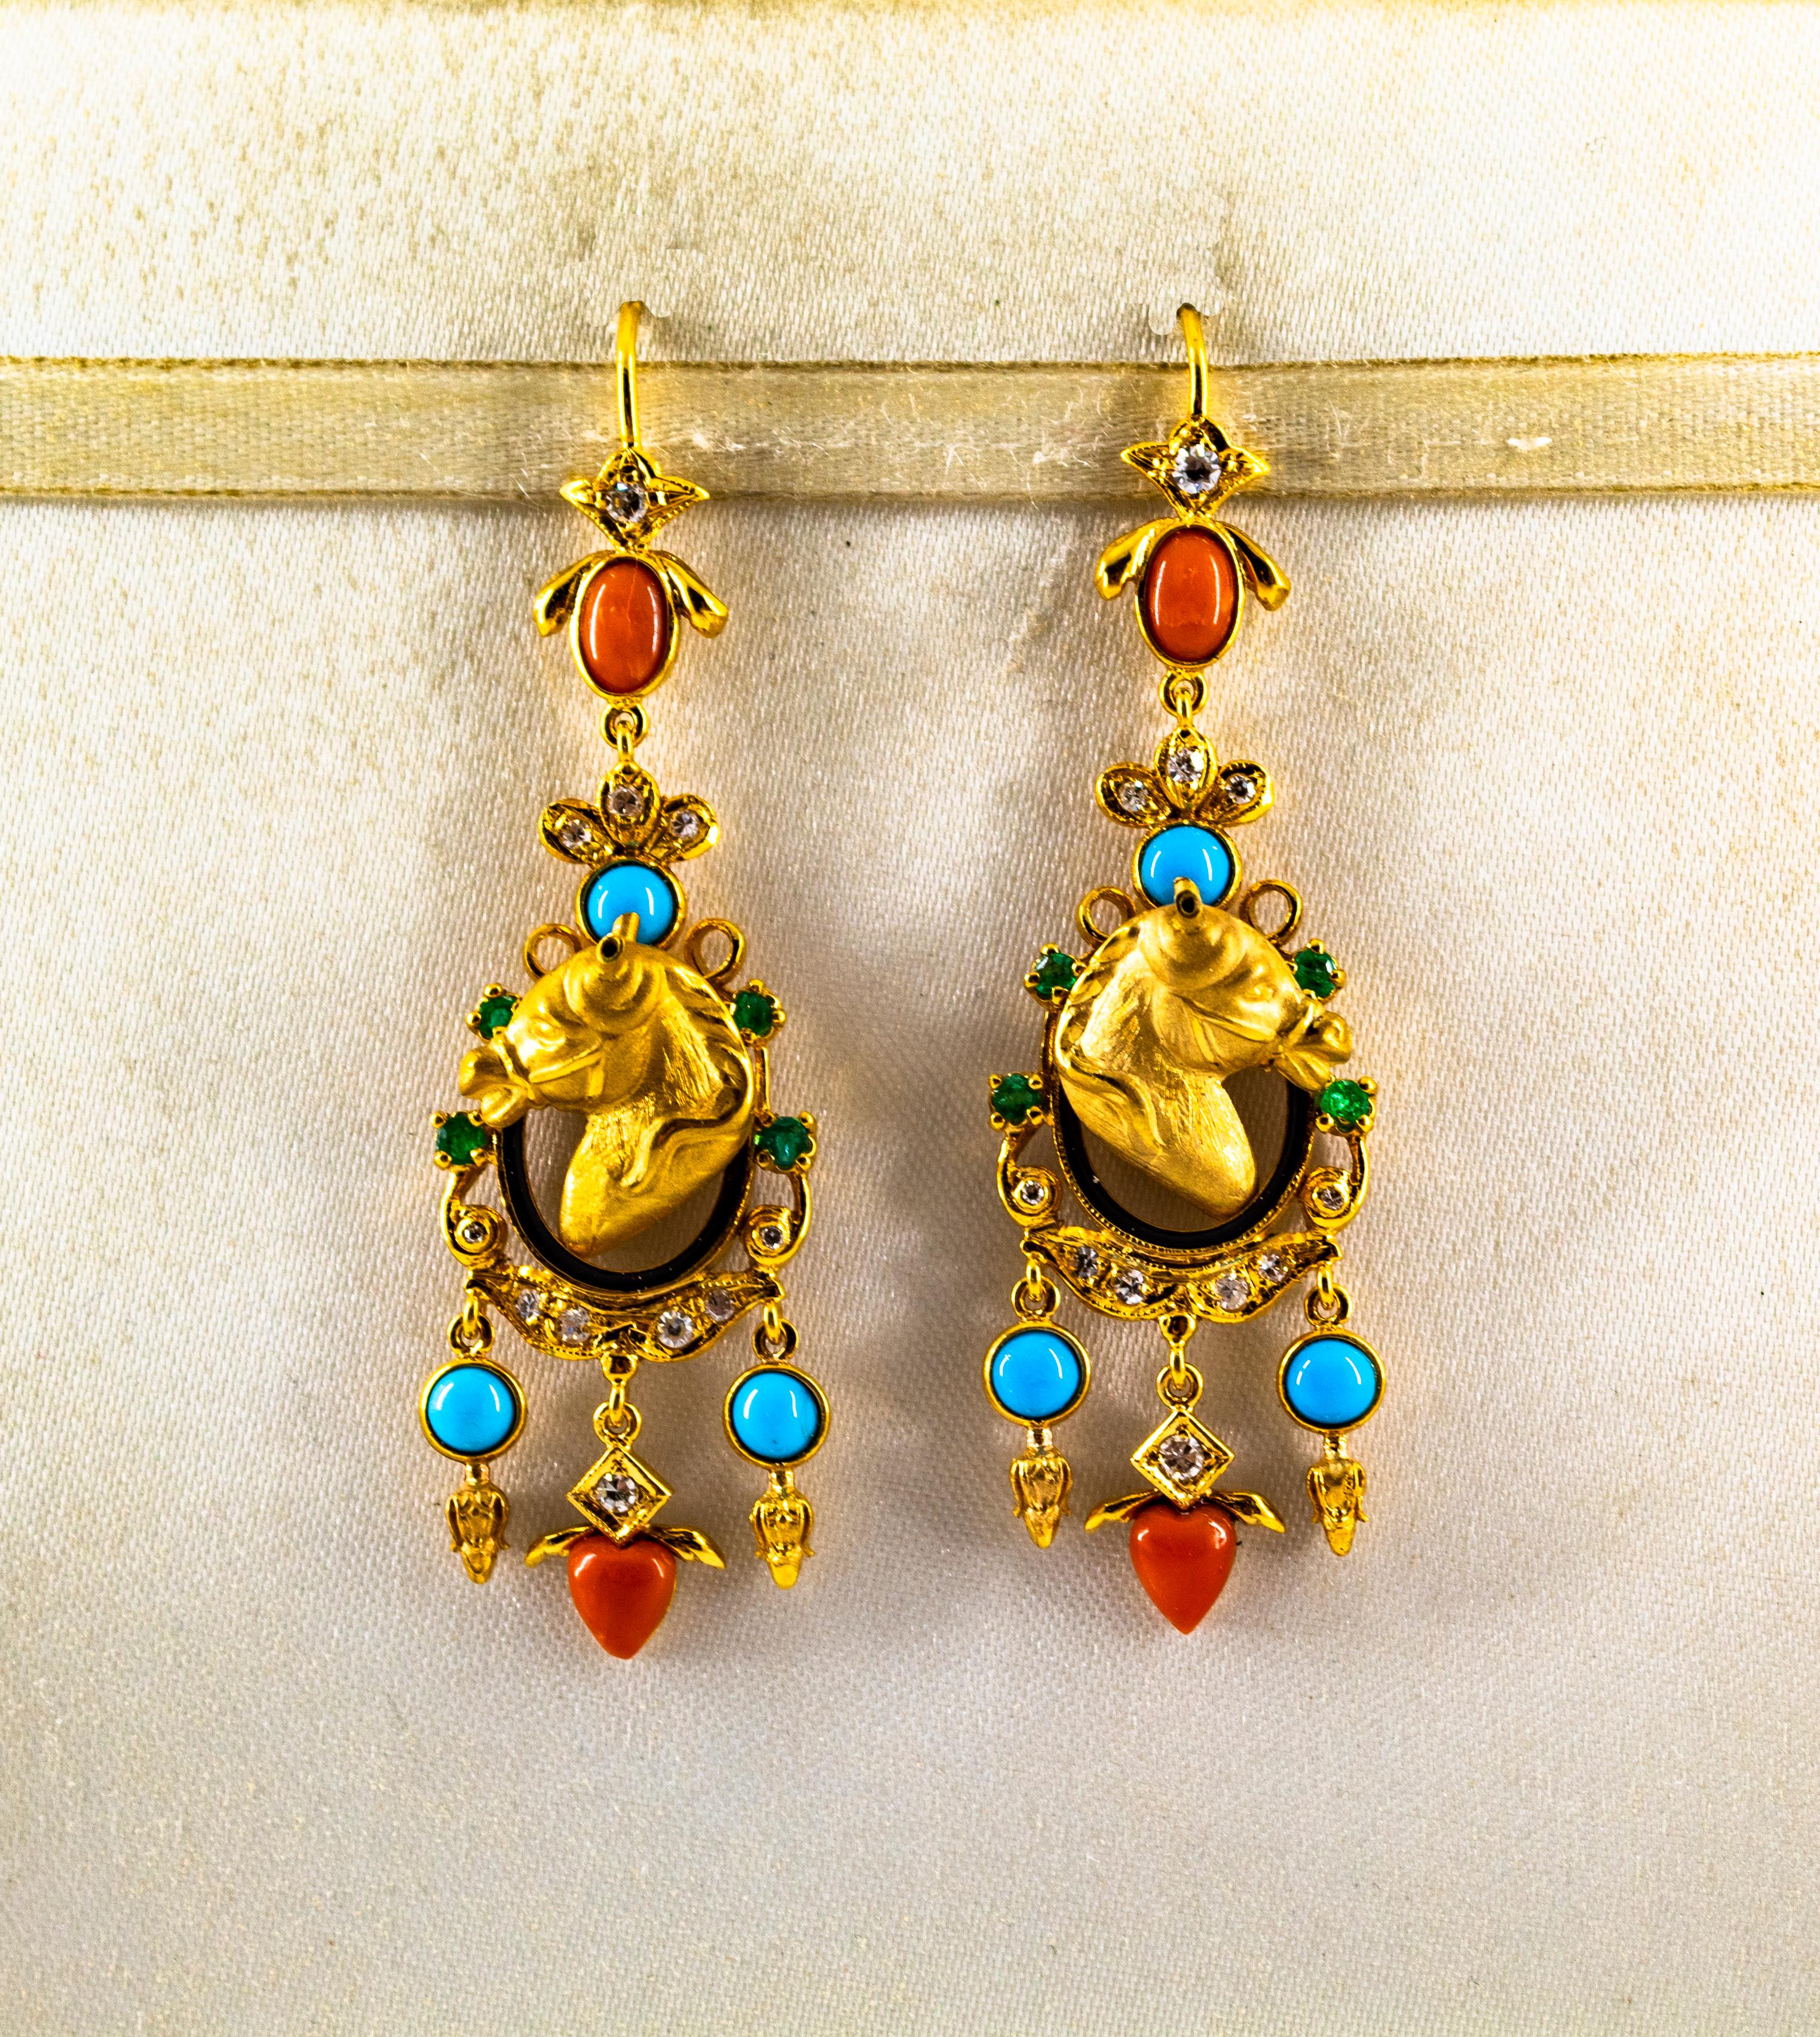 These Earrings are made of 14K Yellow Gold.
These Earrings have 0.40 Carats of White Modern Round Cut Diamonds.
These Earrings have 0.30 Carats of Emeralds.
These Earrings have also Mediterranean (Sardinia, Italy) Red Coral, Turquoise and